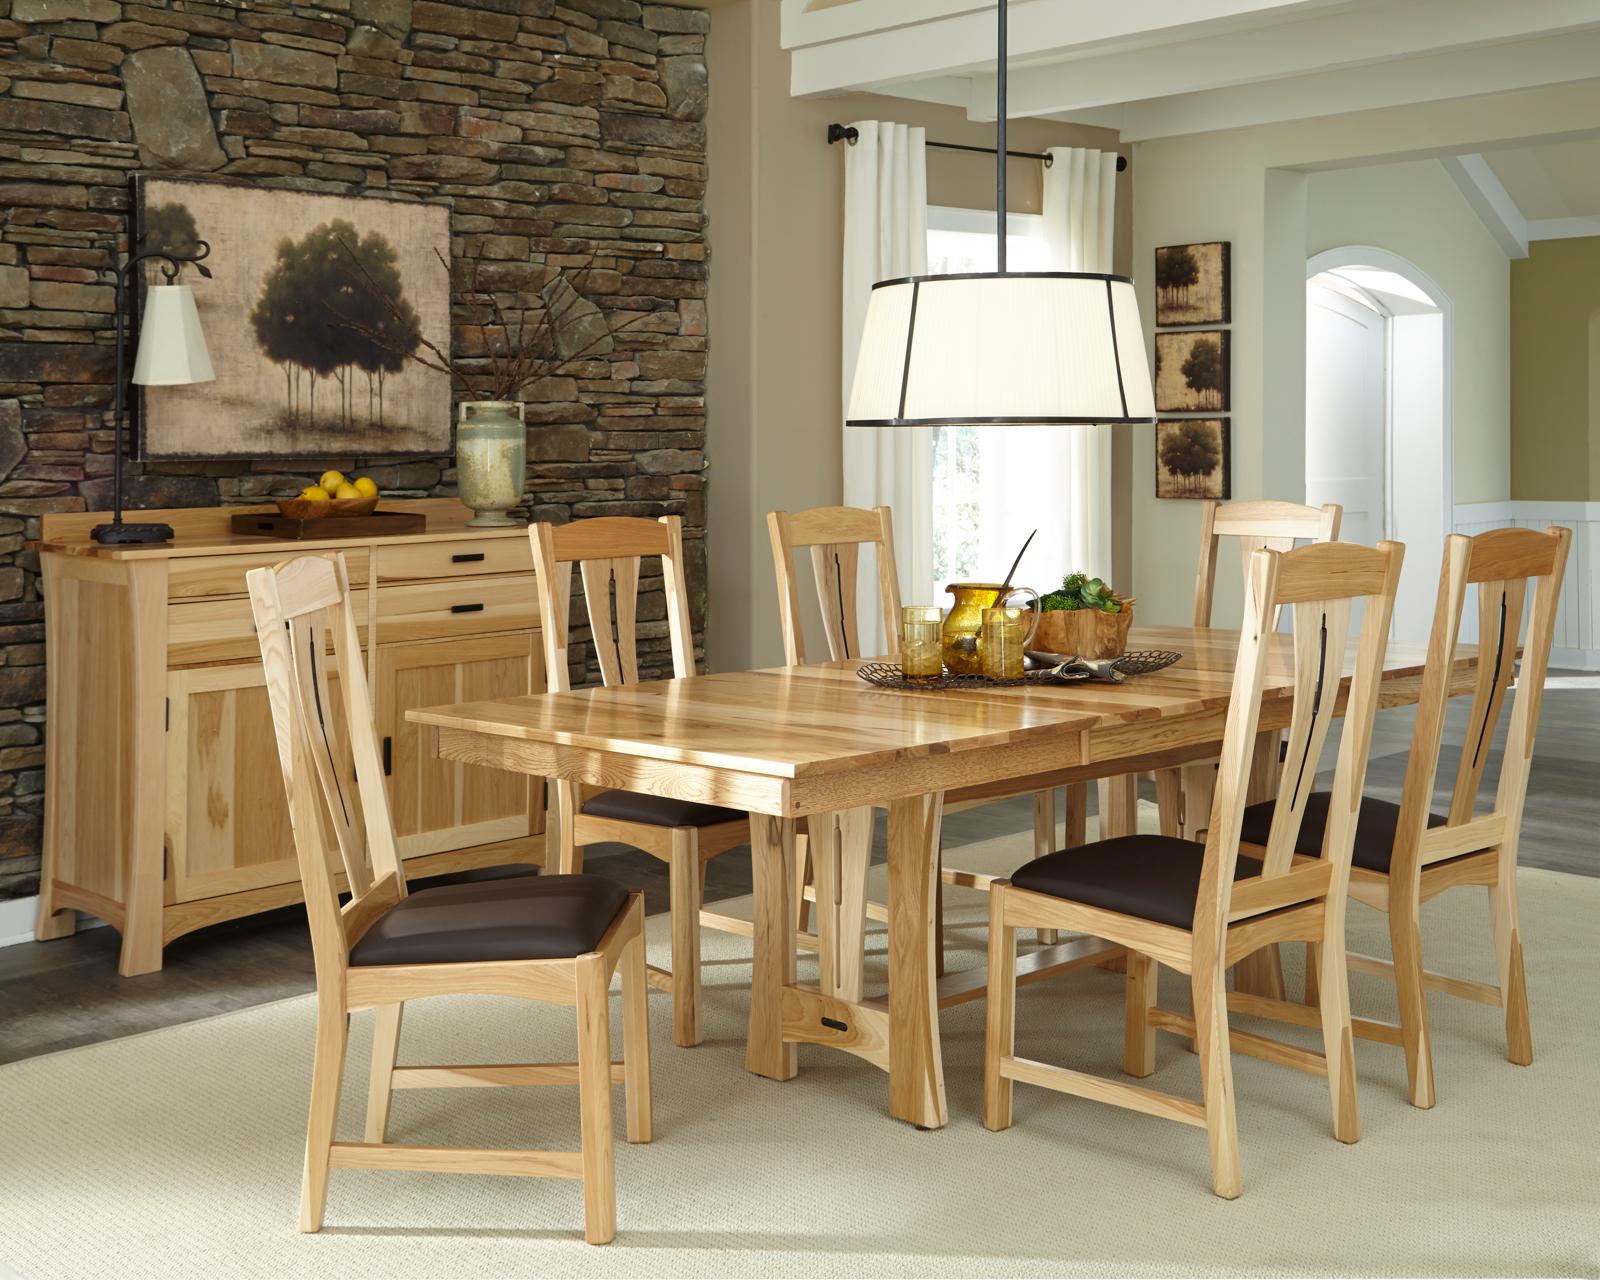 Rustic Dining Table Set Cattail Bungalow Natural CATNT6300-Set-8 in Natural Top grain leather